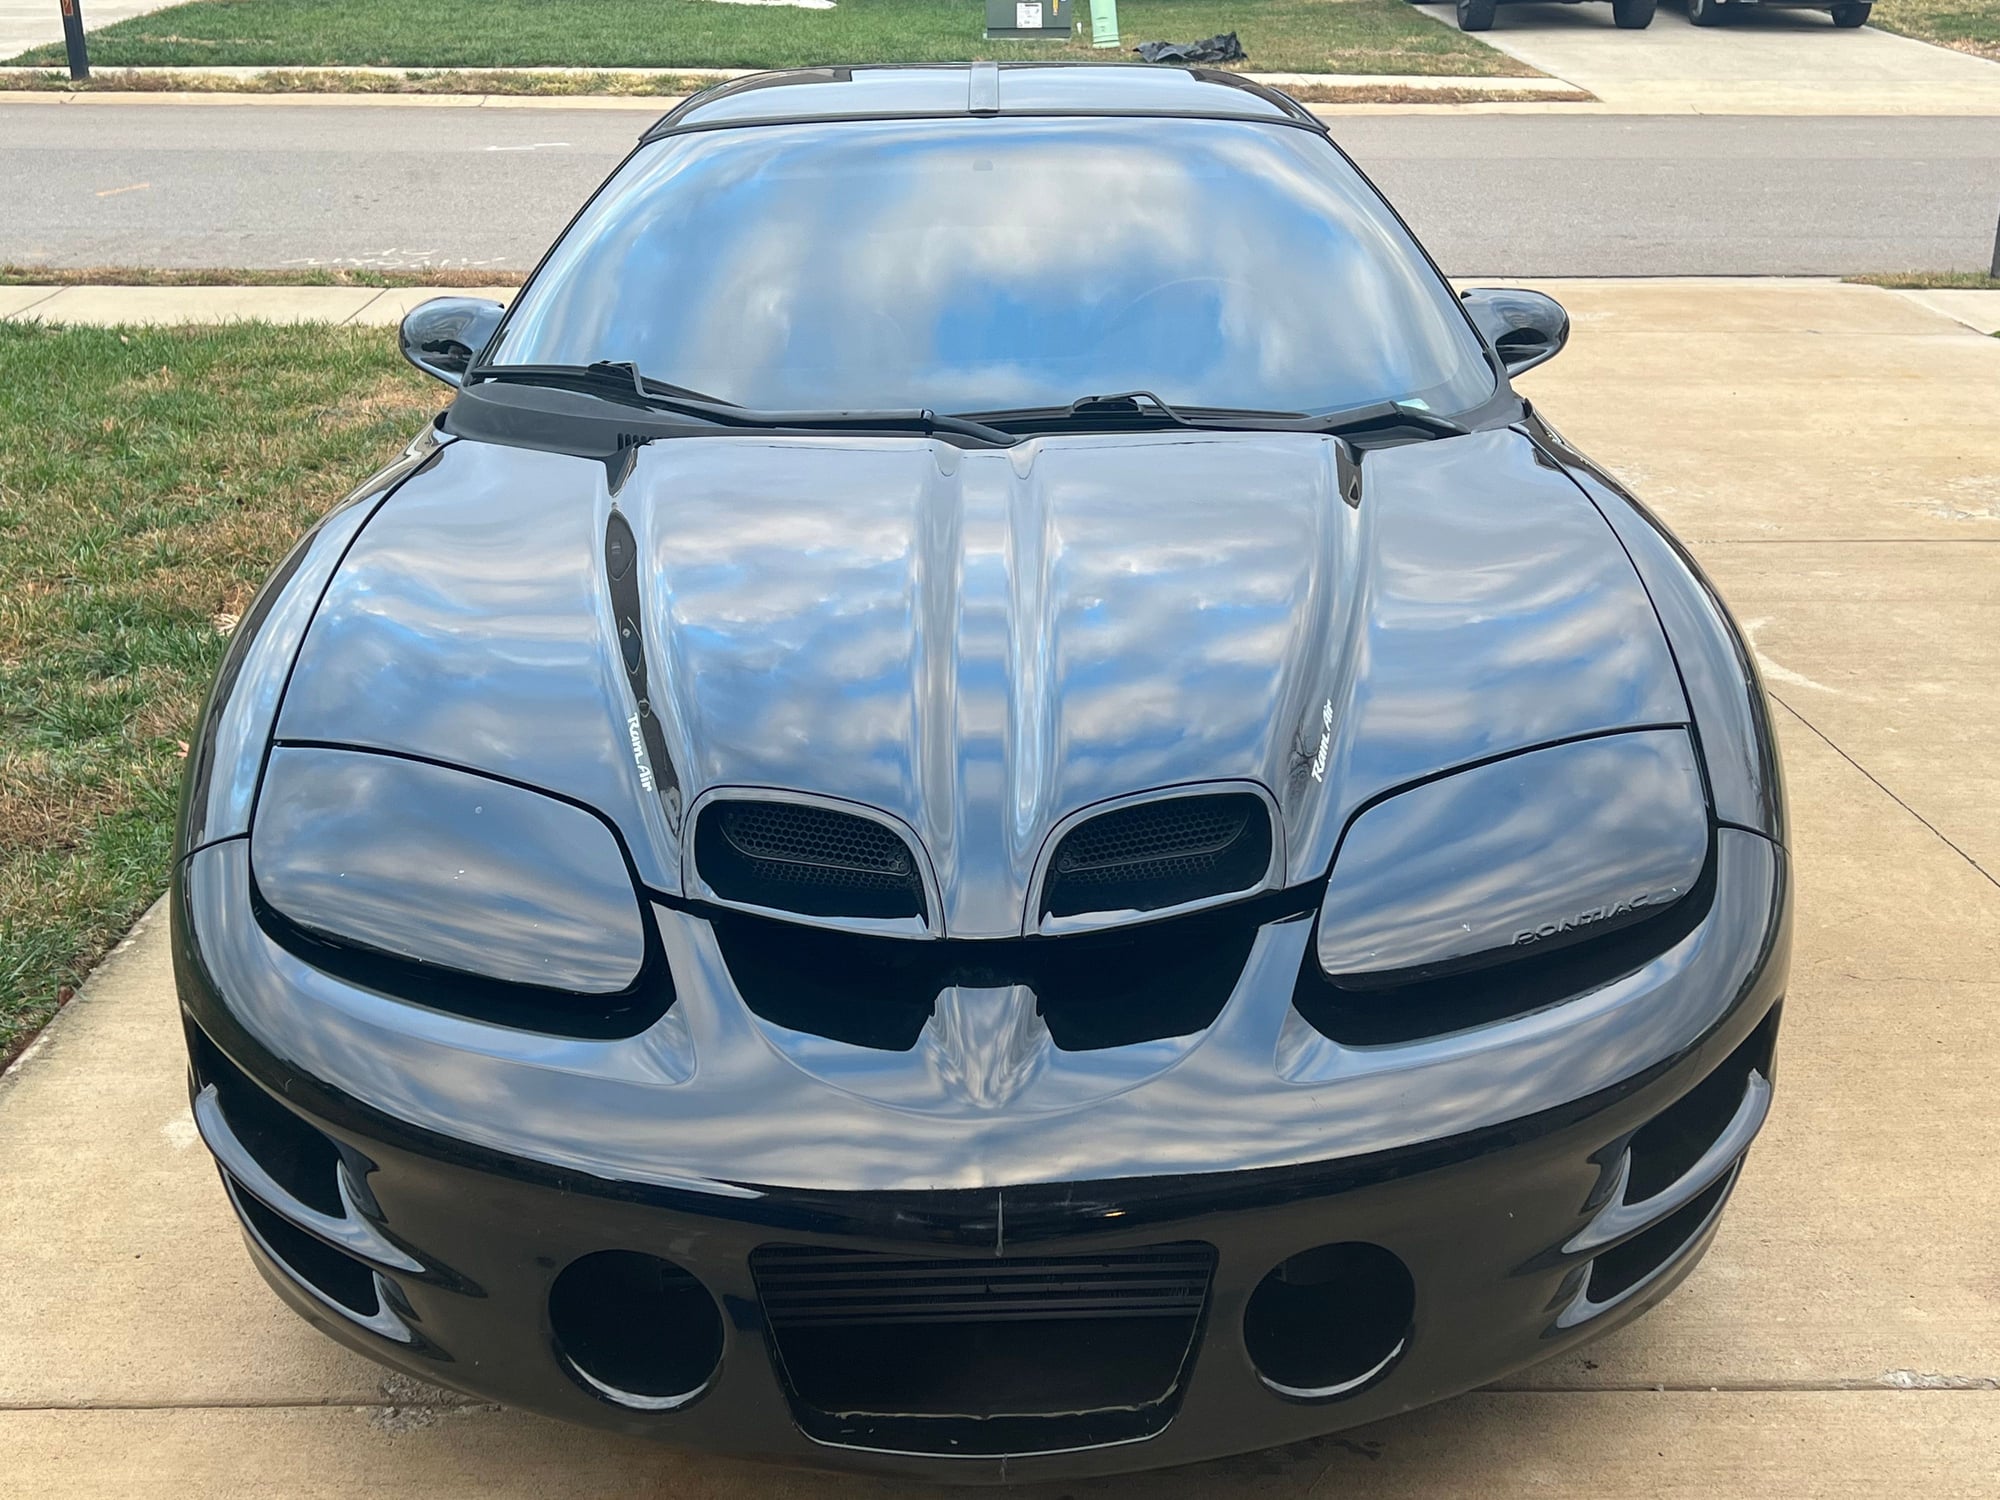 2002 Pontiac Firebird - 02 WS6 M6 Single Turbo - Used - VIN Will provide - 180,000 Miles - 2WD - Manual - Coupe - Black - Clarksville, TN 37043, United States